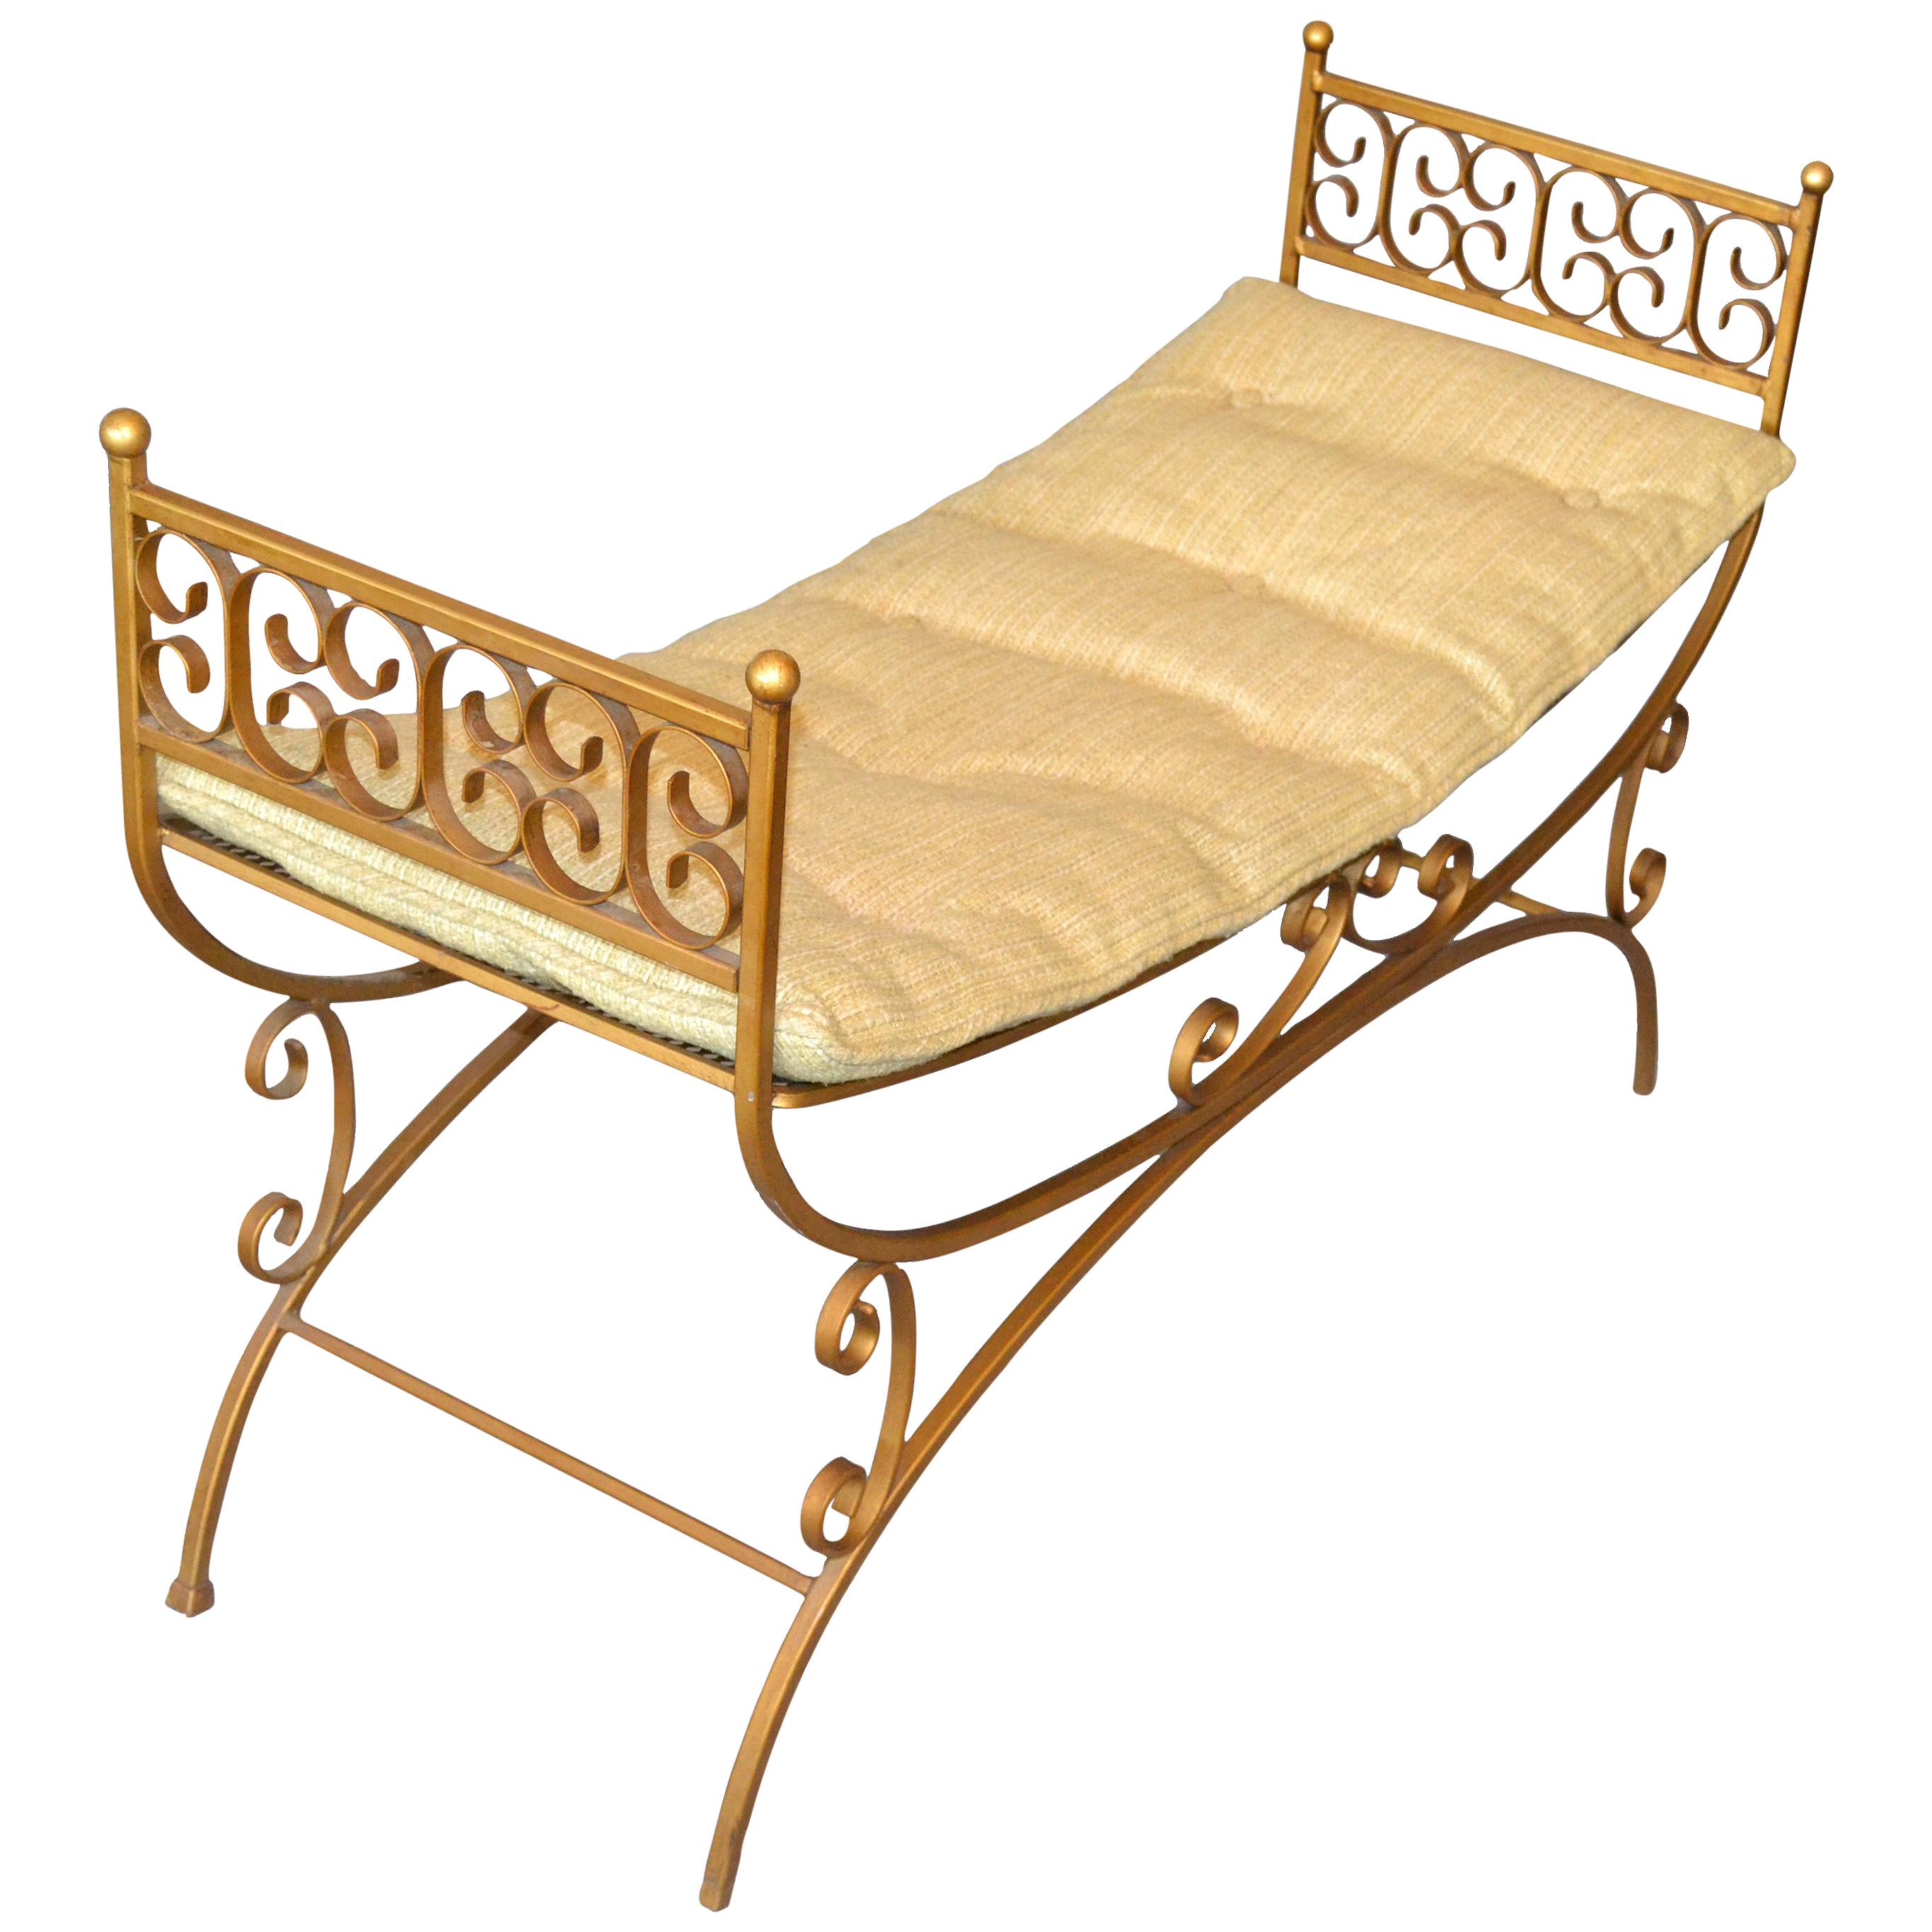 Neoclassical Golden Wrought Iron Bench with Cushions For Sale